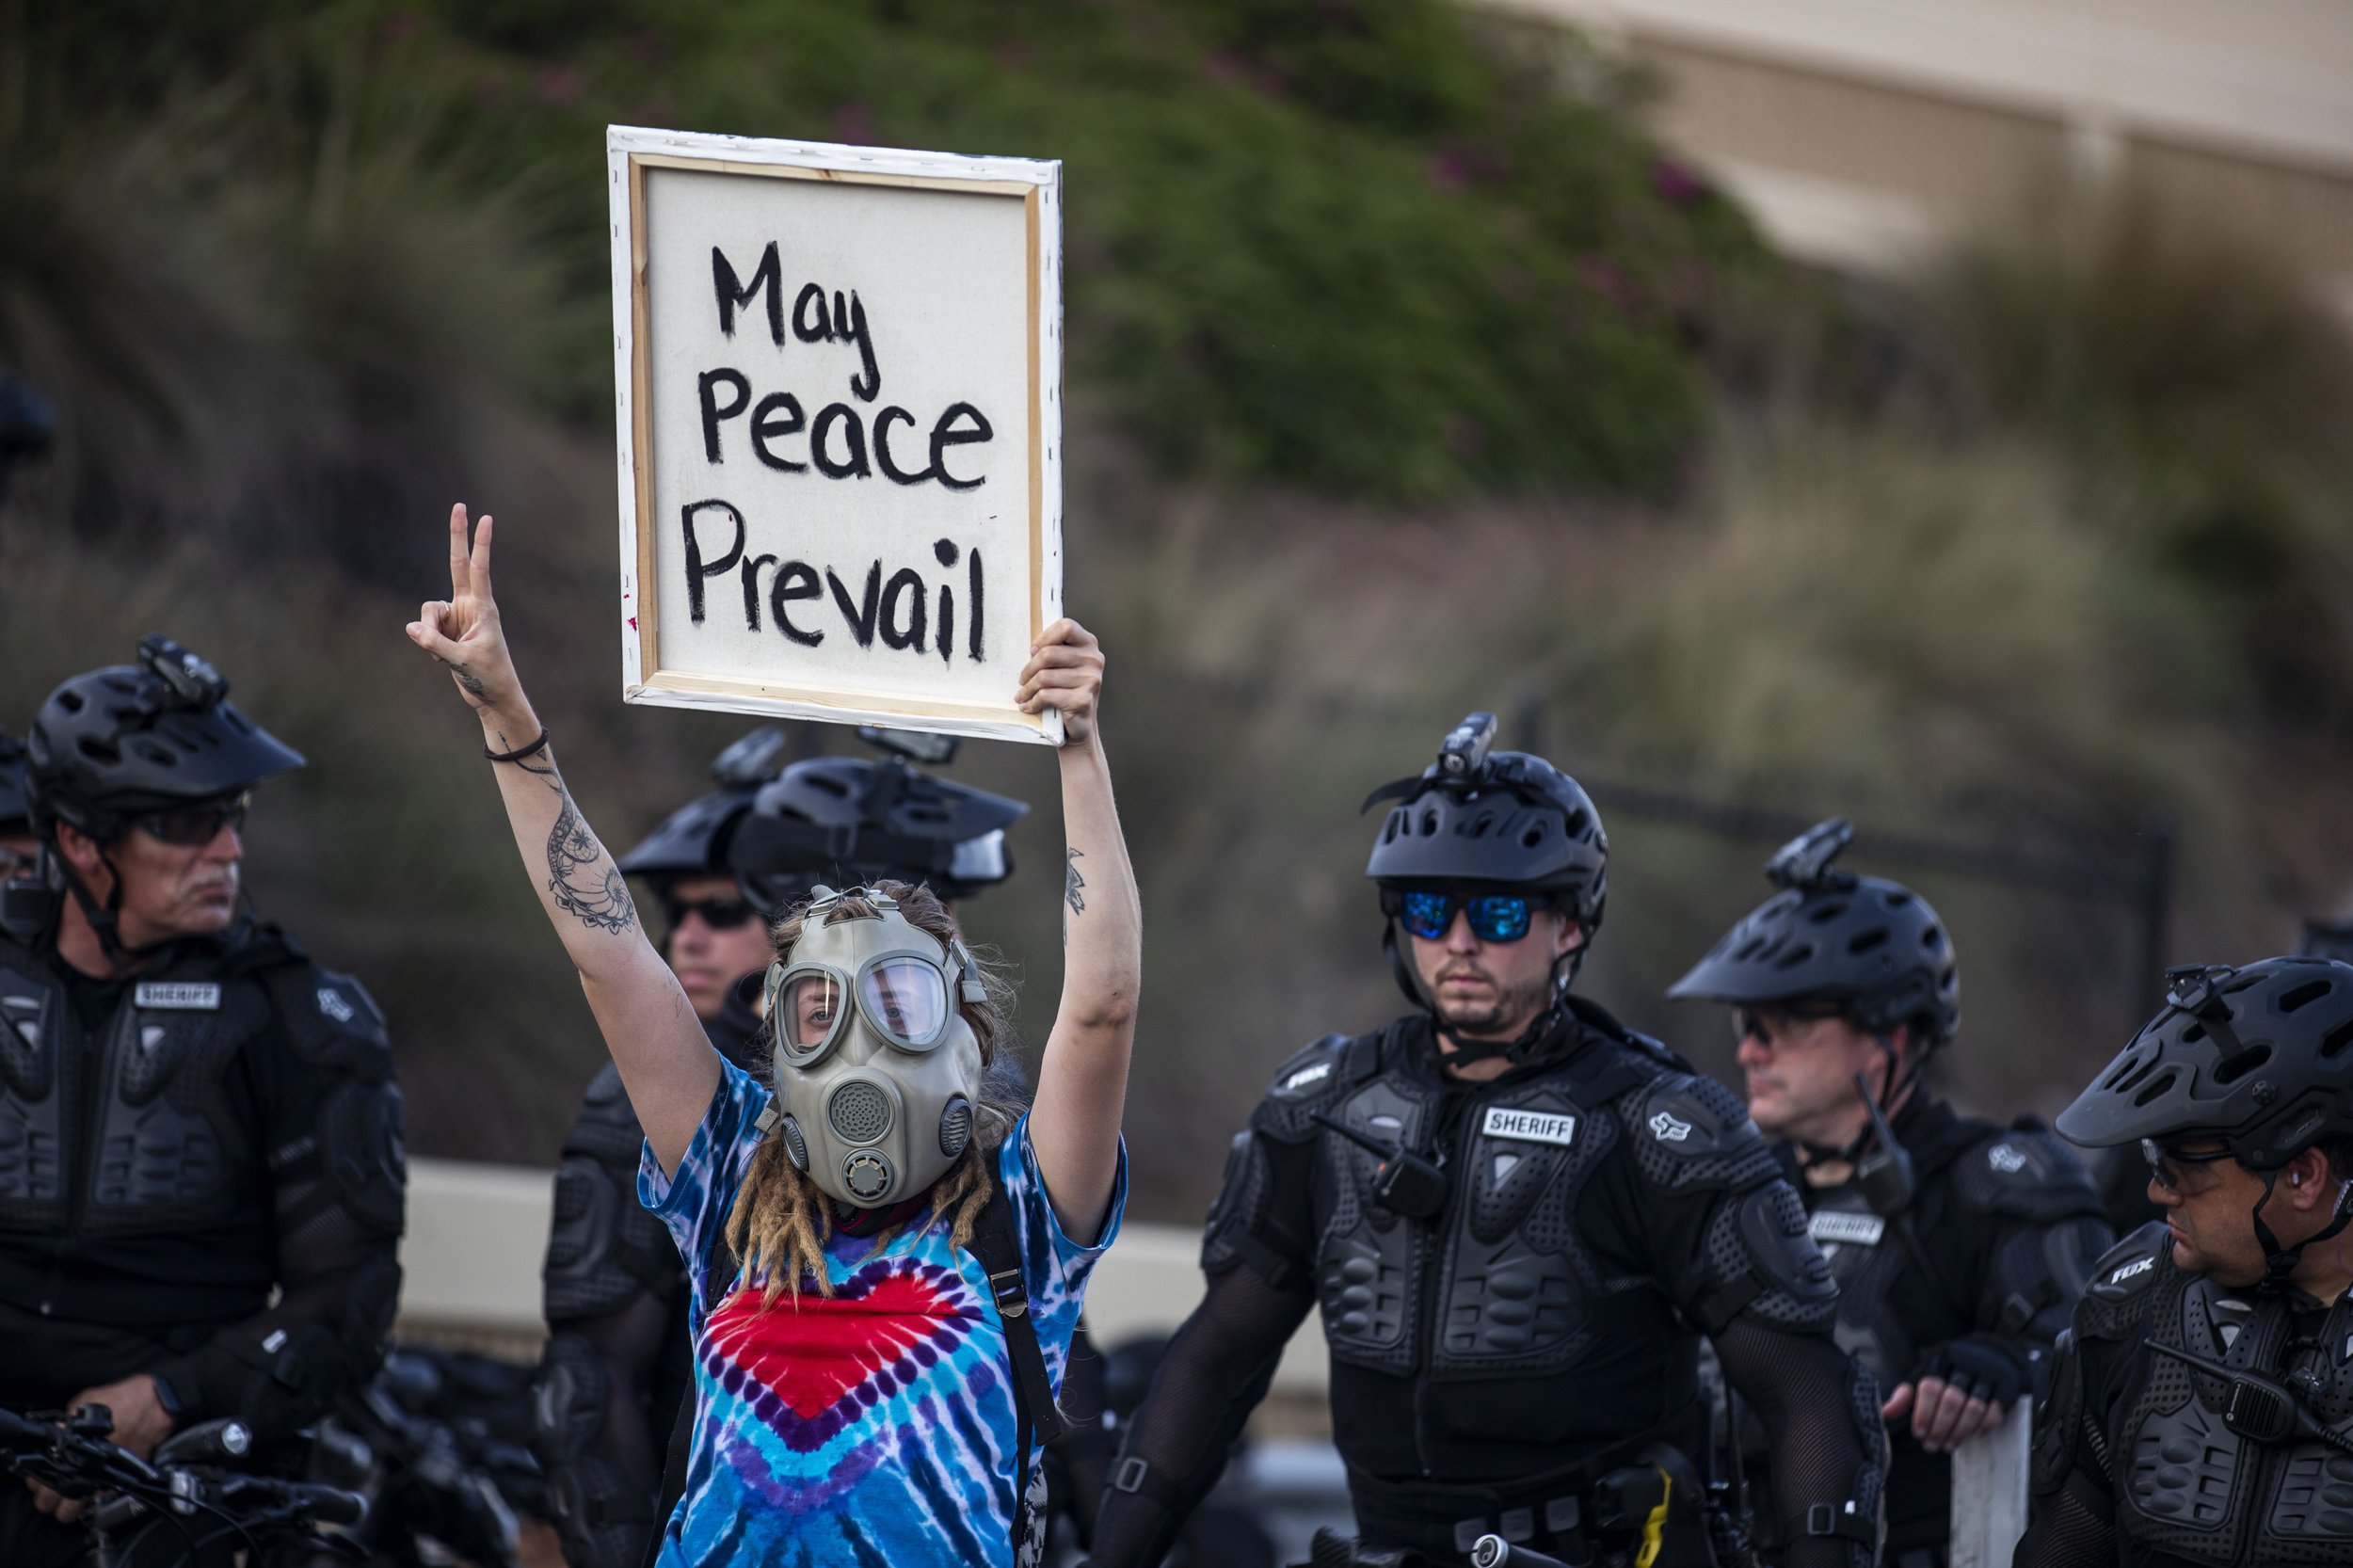  Police block an on ramp to State Road 408 while a protester holds up a sign during a demonstration demanding justice for George Floyd in Orlando on Sunday, May 31, 2020. 